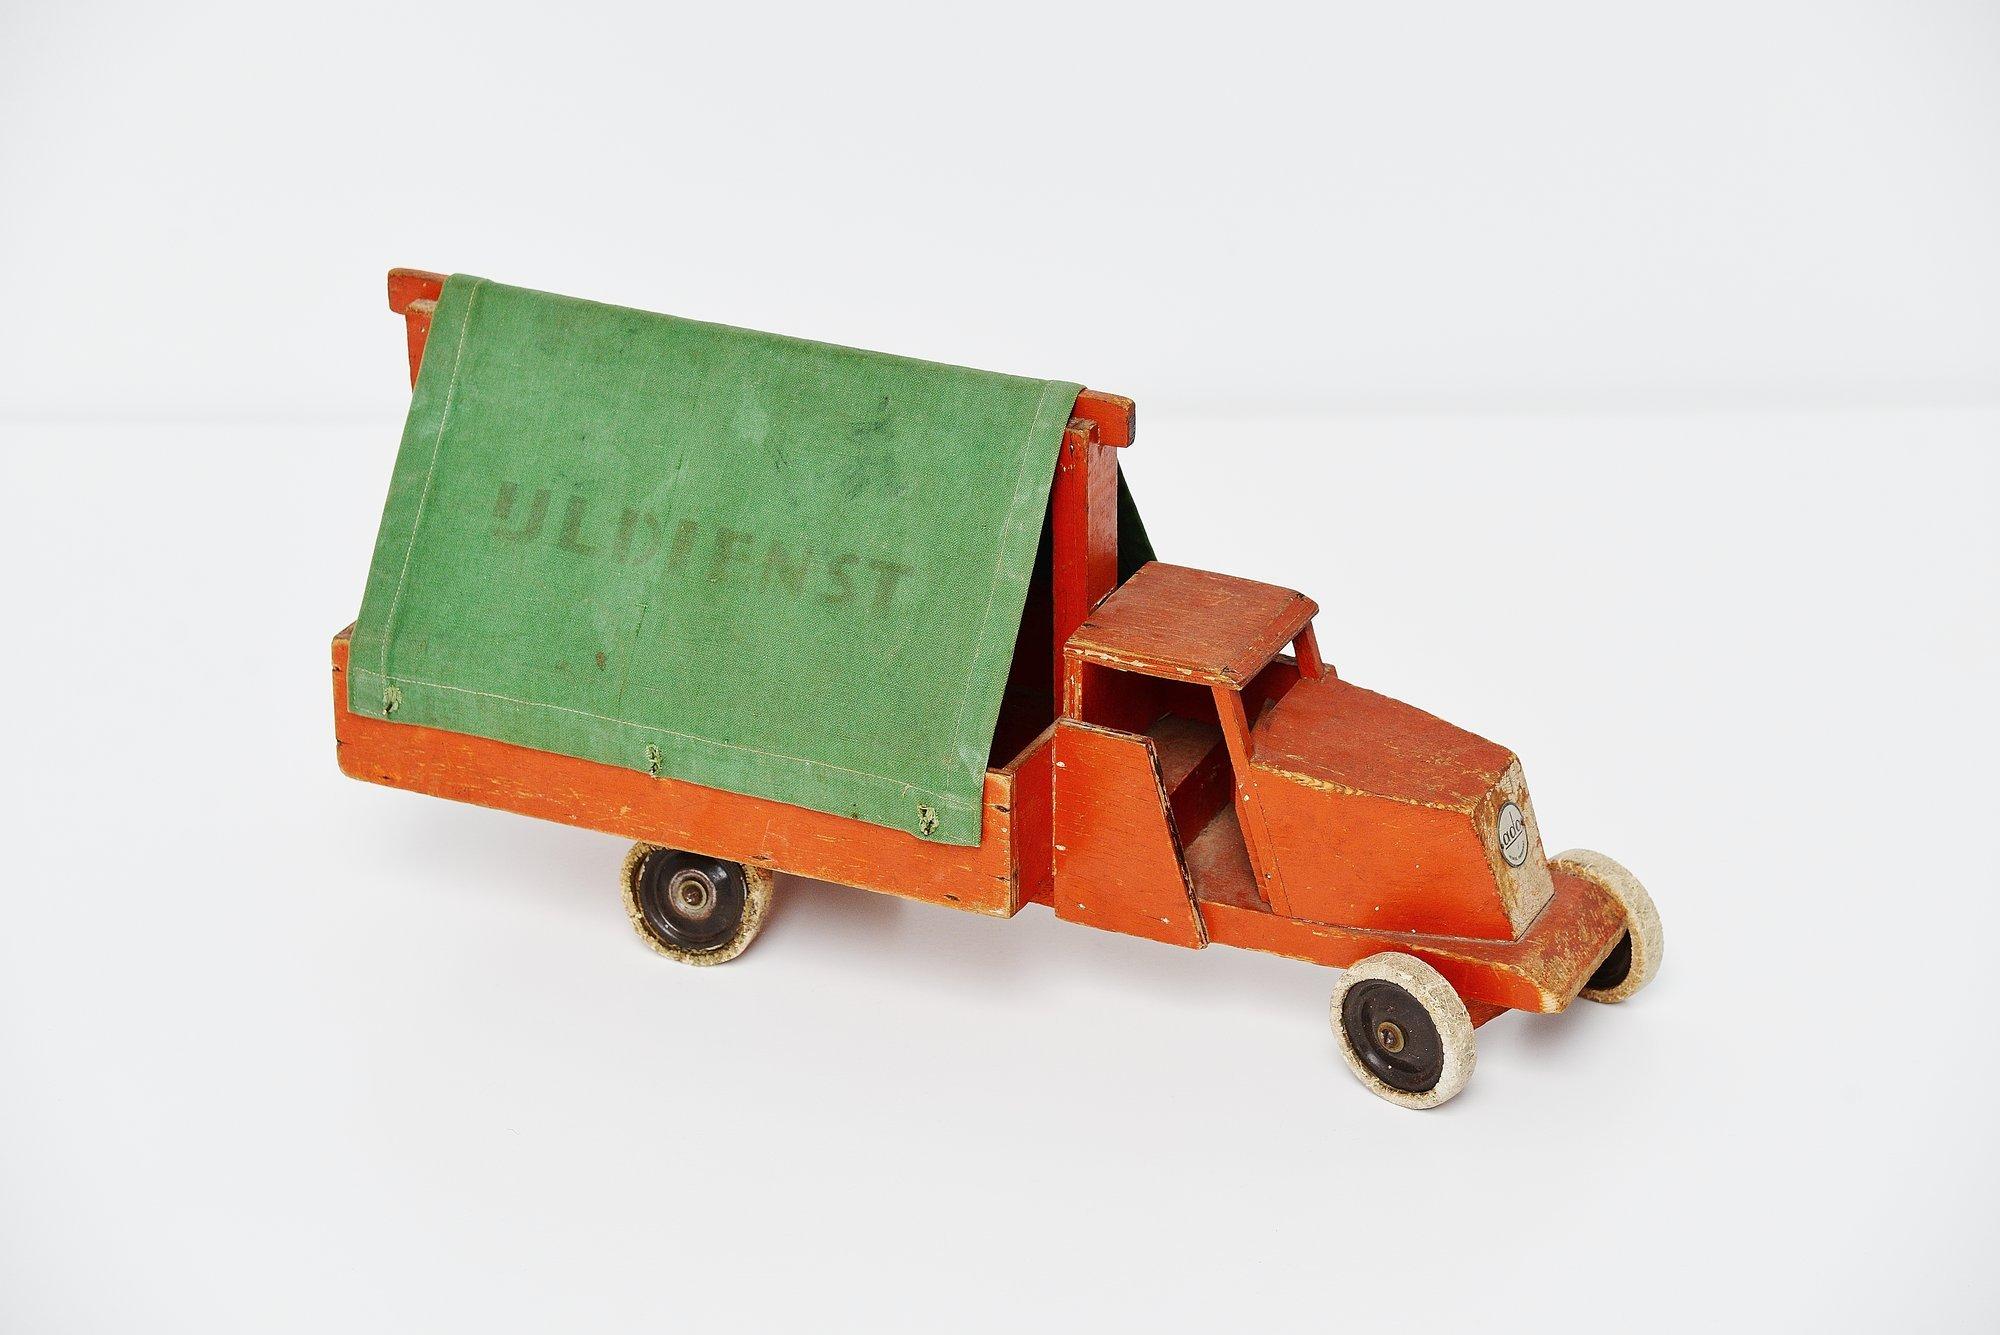 Very nice and rare complete ‘Ijldienst (first help) toy truck designed by Ko Verzuu for Ado Holland in 1937. Ado means Arbeid door onvolwaardigen, translated; labour by incapacitated, which makes this an even more special piece. Toys by Ado are